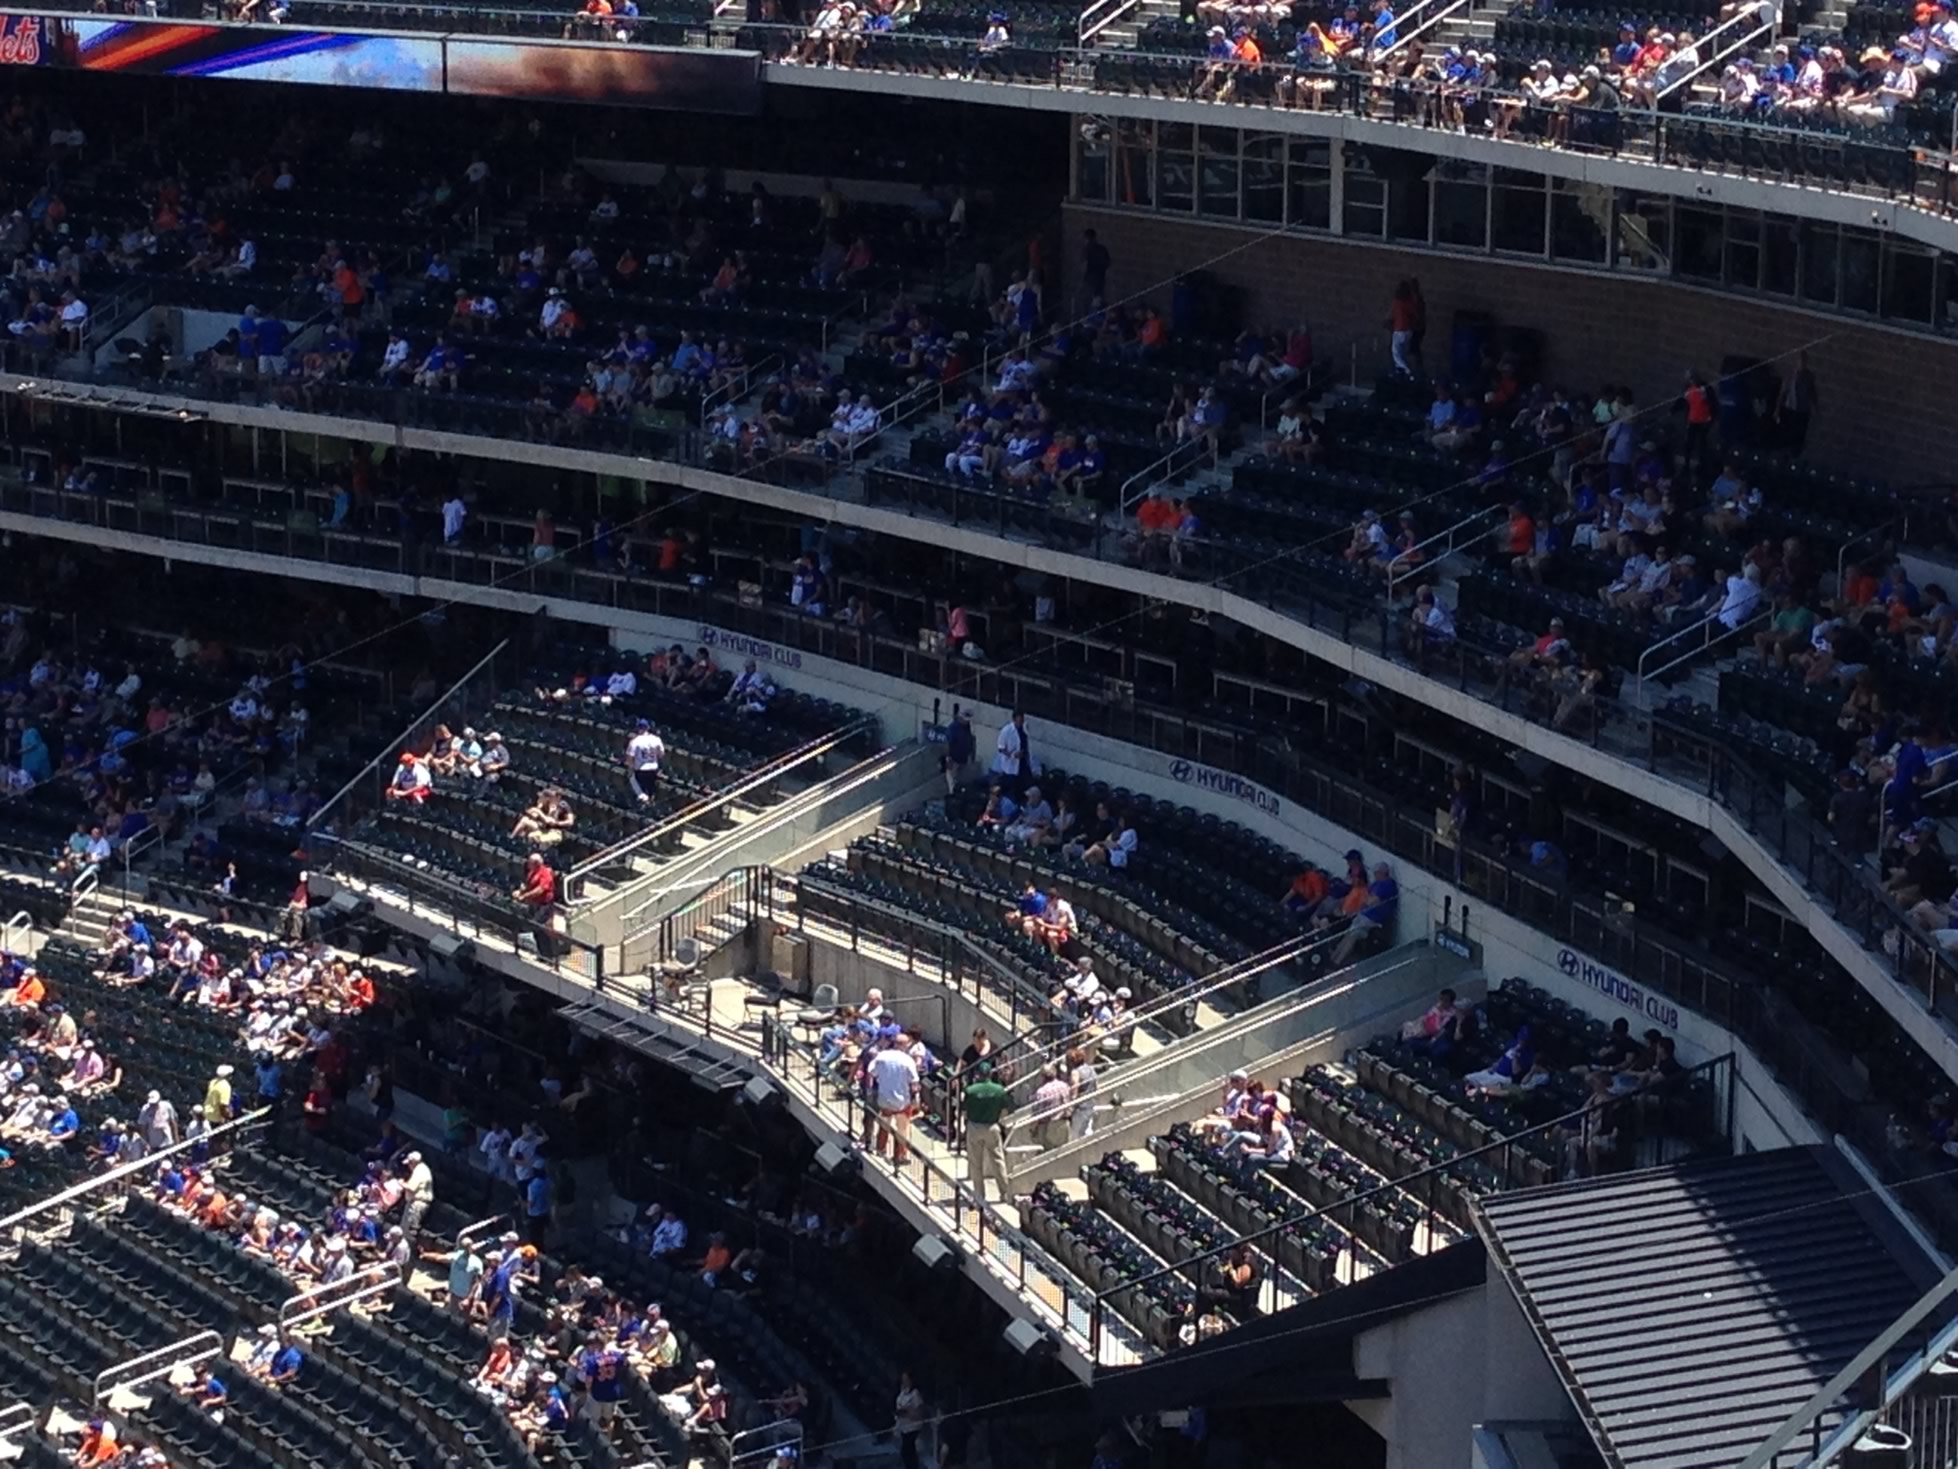 New York Mets Club Seating at Citi Field - RateYourSeats.com